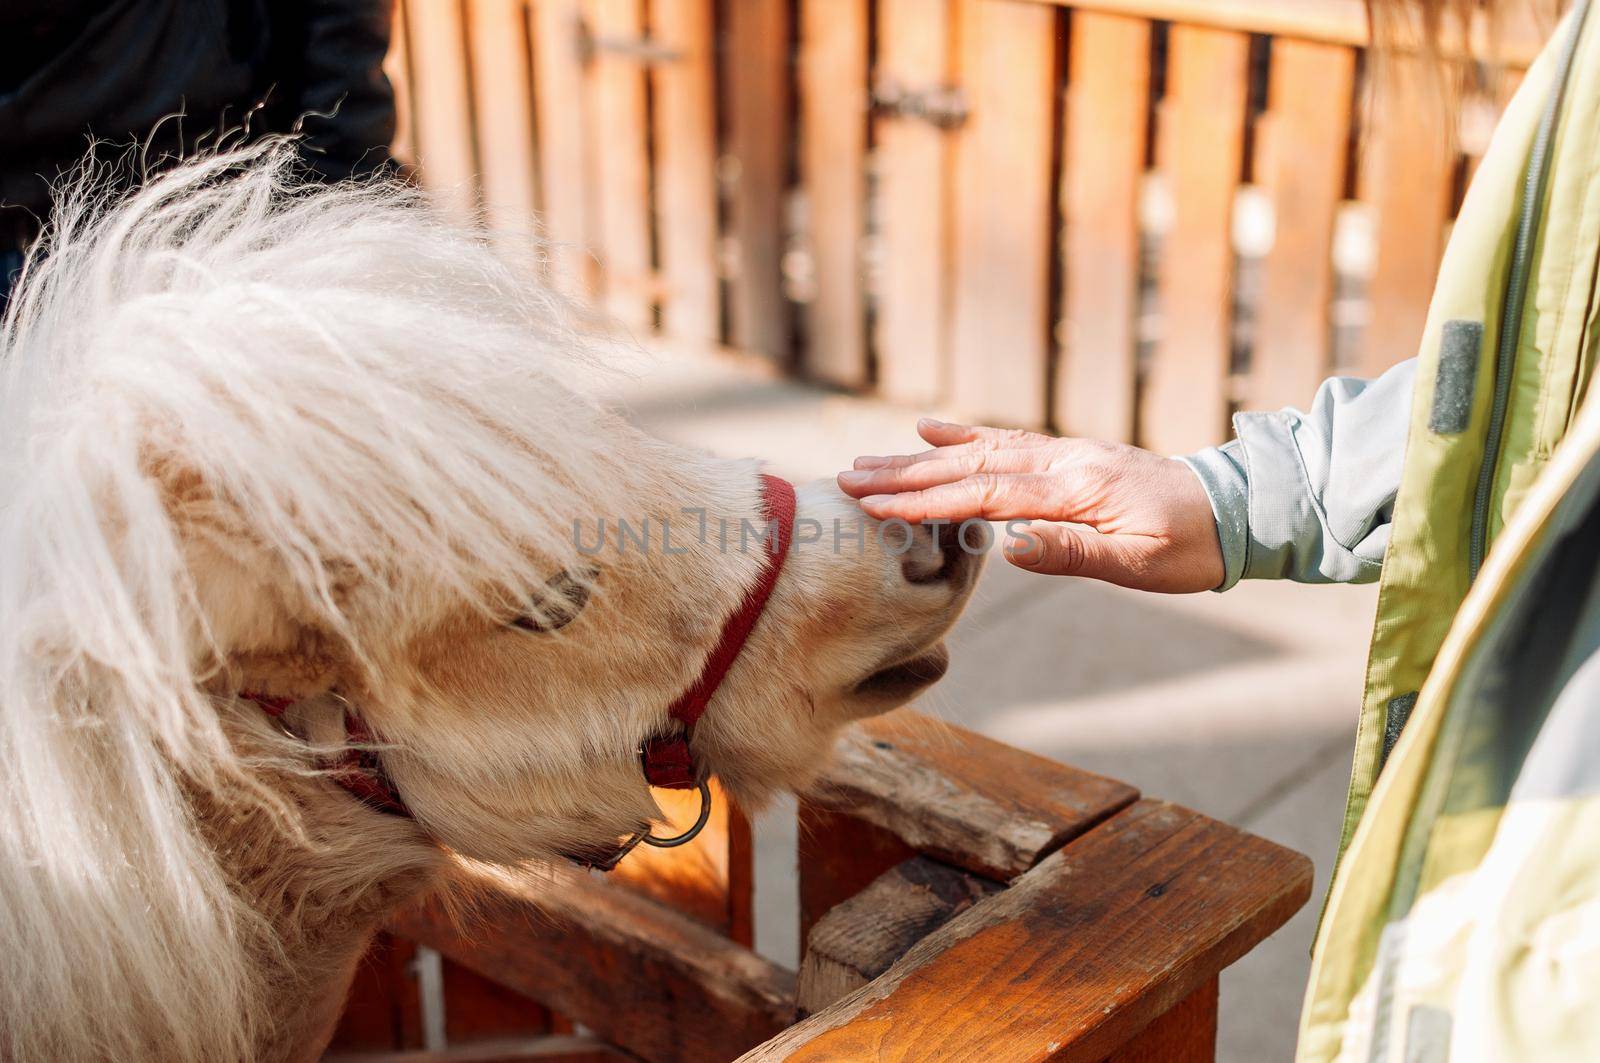 A young girl strokes a pony on the nose at the zoo through a wooden fence. The mammal is on the family farm.